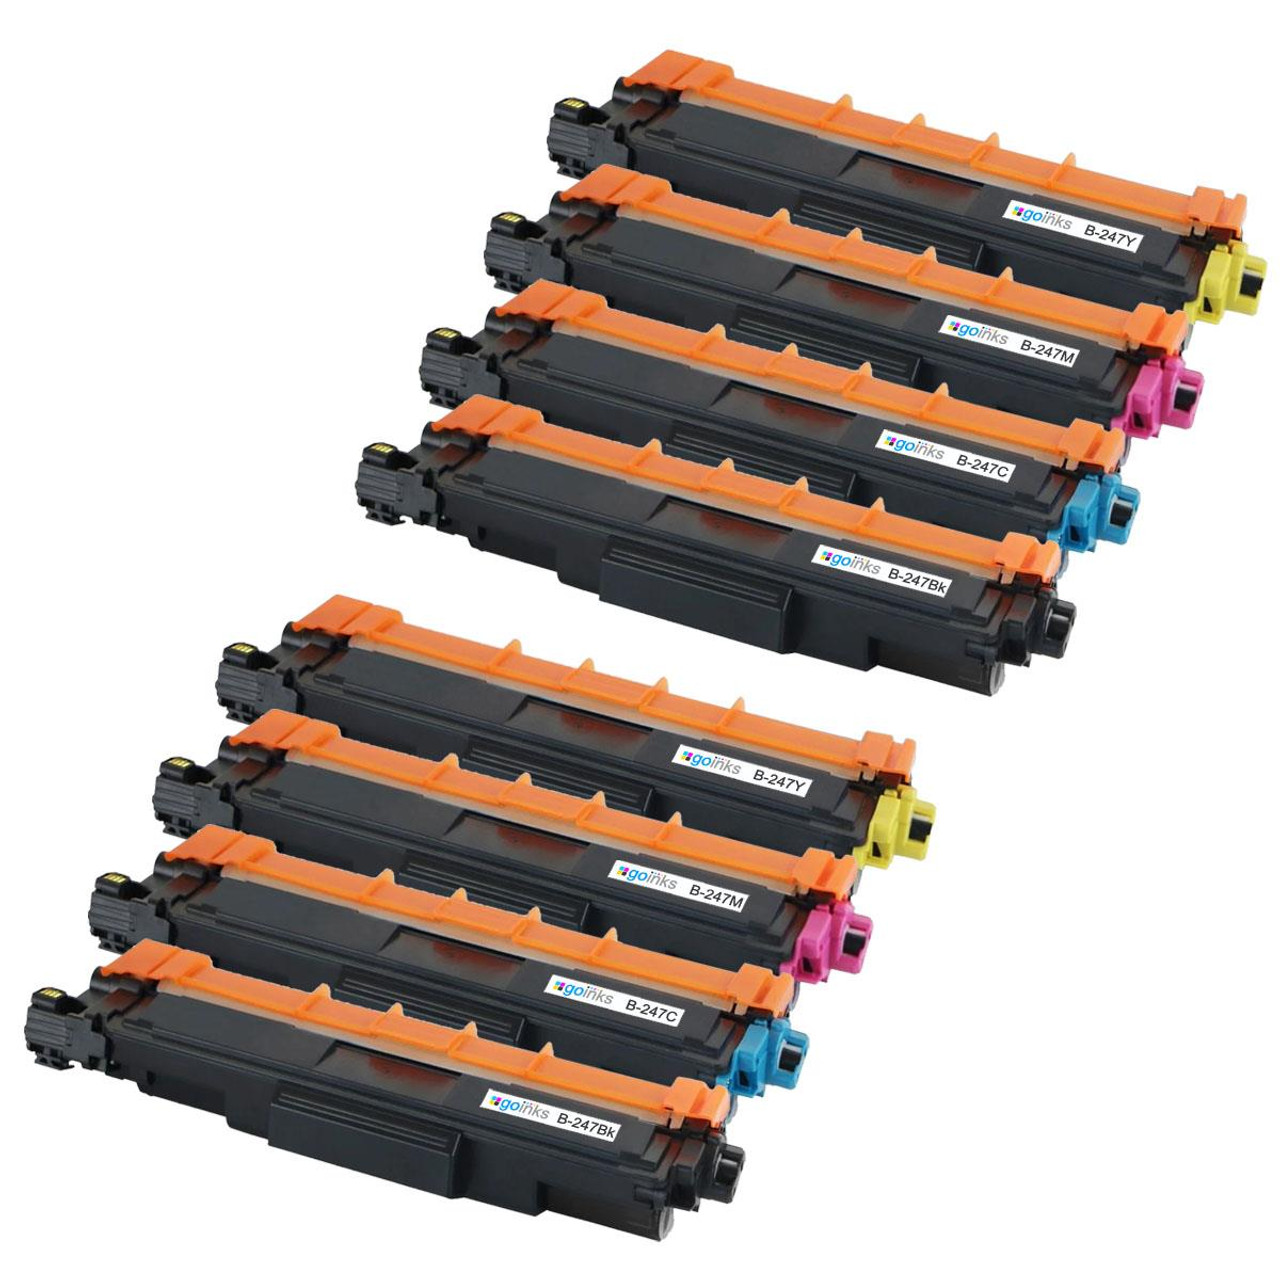 Compatible Brother TN423 - 2 Sets of 4 Laser Toner Cartridges from